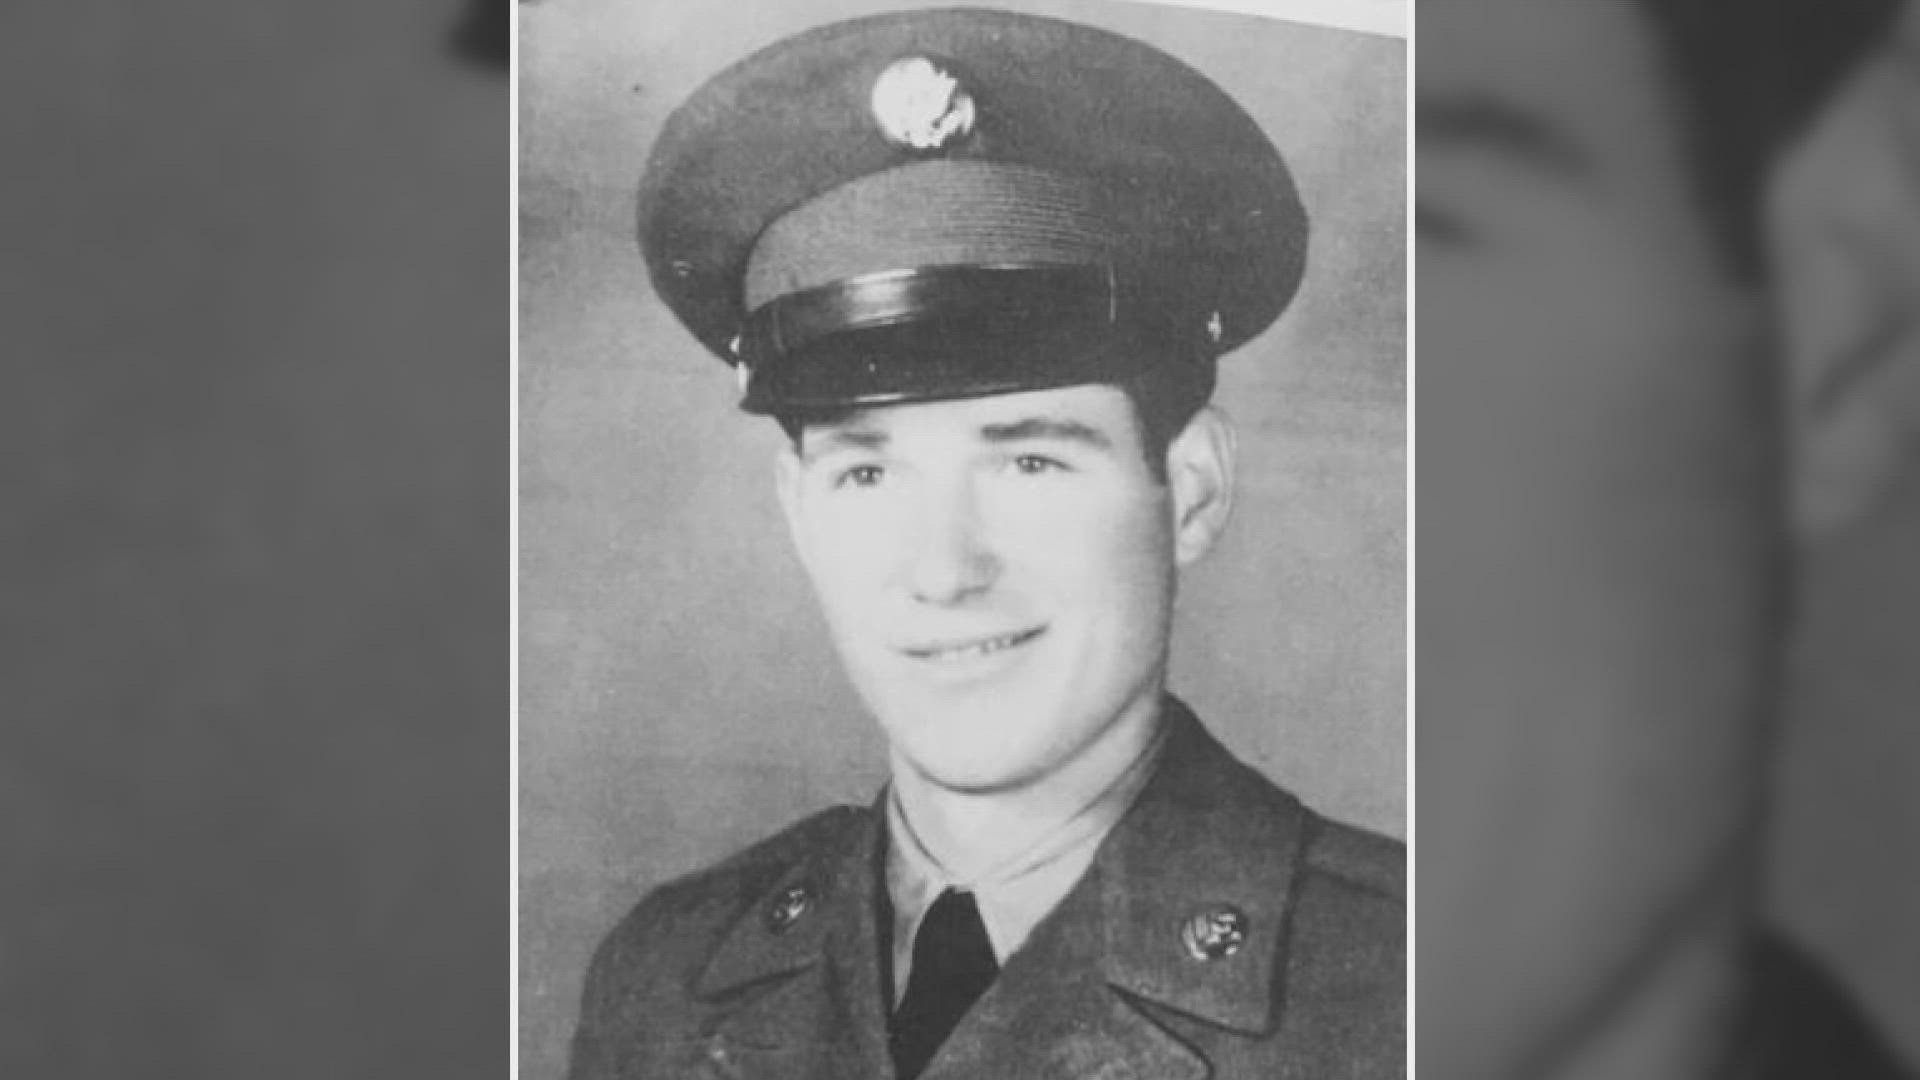 Army Private First Class Robert Wright of Whitesville, Kentucky was 18 when he went missing in action during the Korean War.